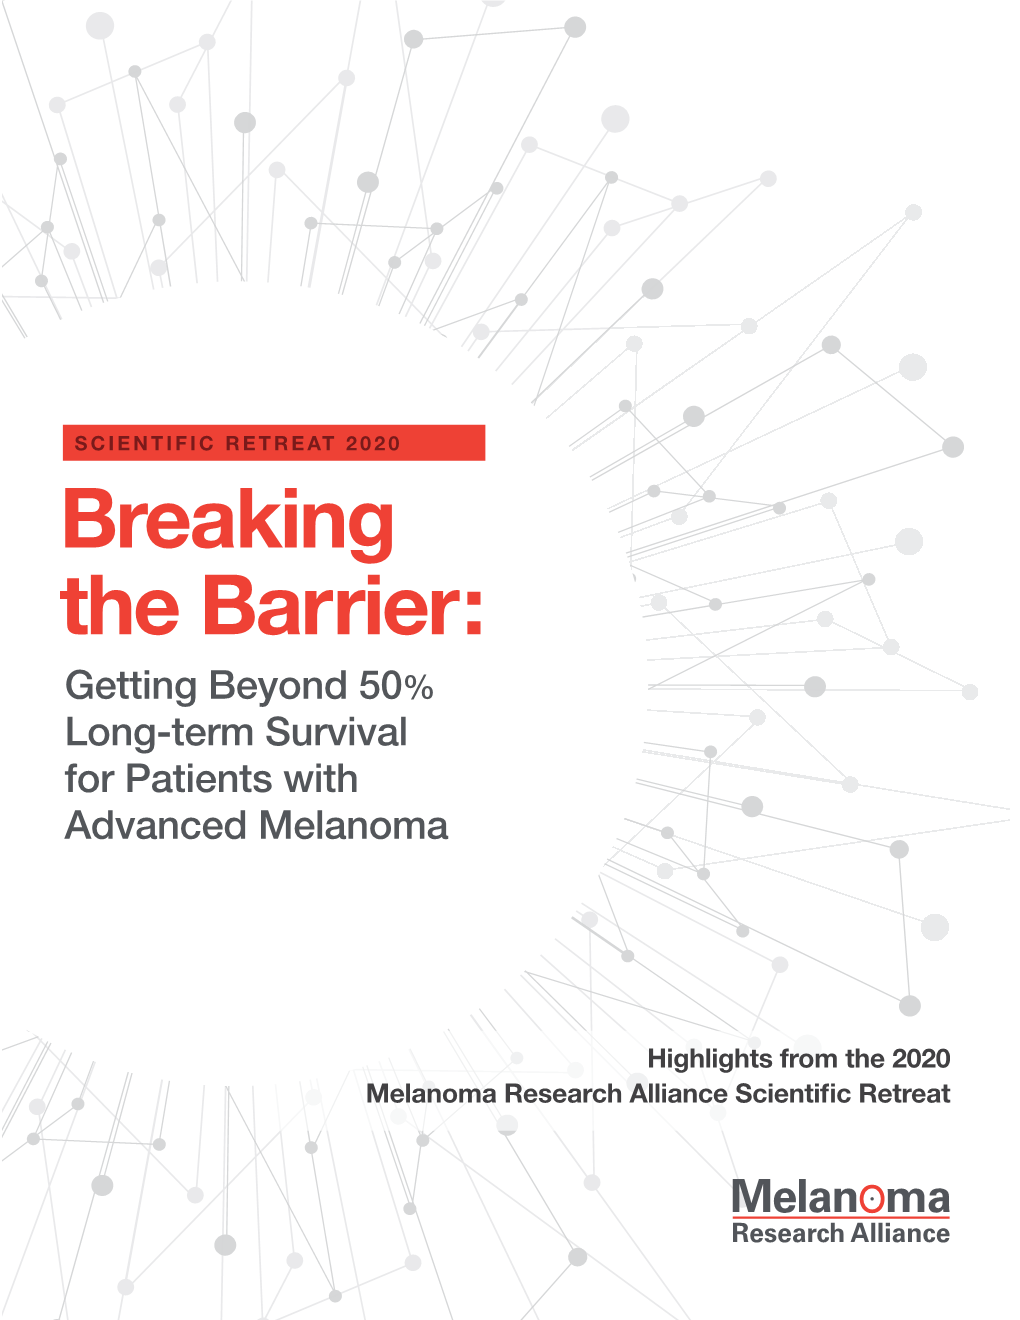 Breaking the Barrier: Getting Beyond 50% Long-Term Survival for Patients with Advanced Melanoma